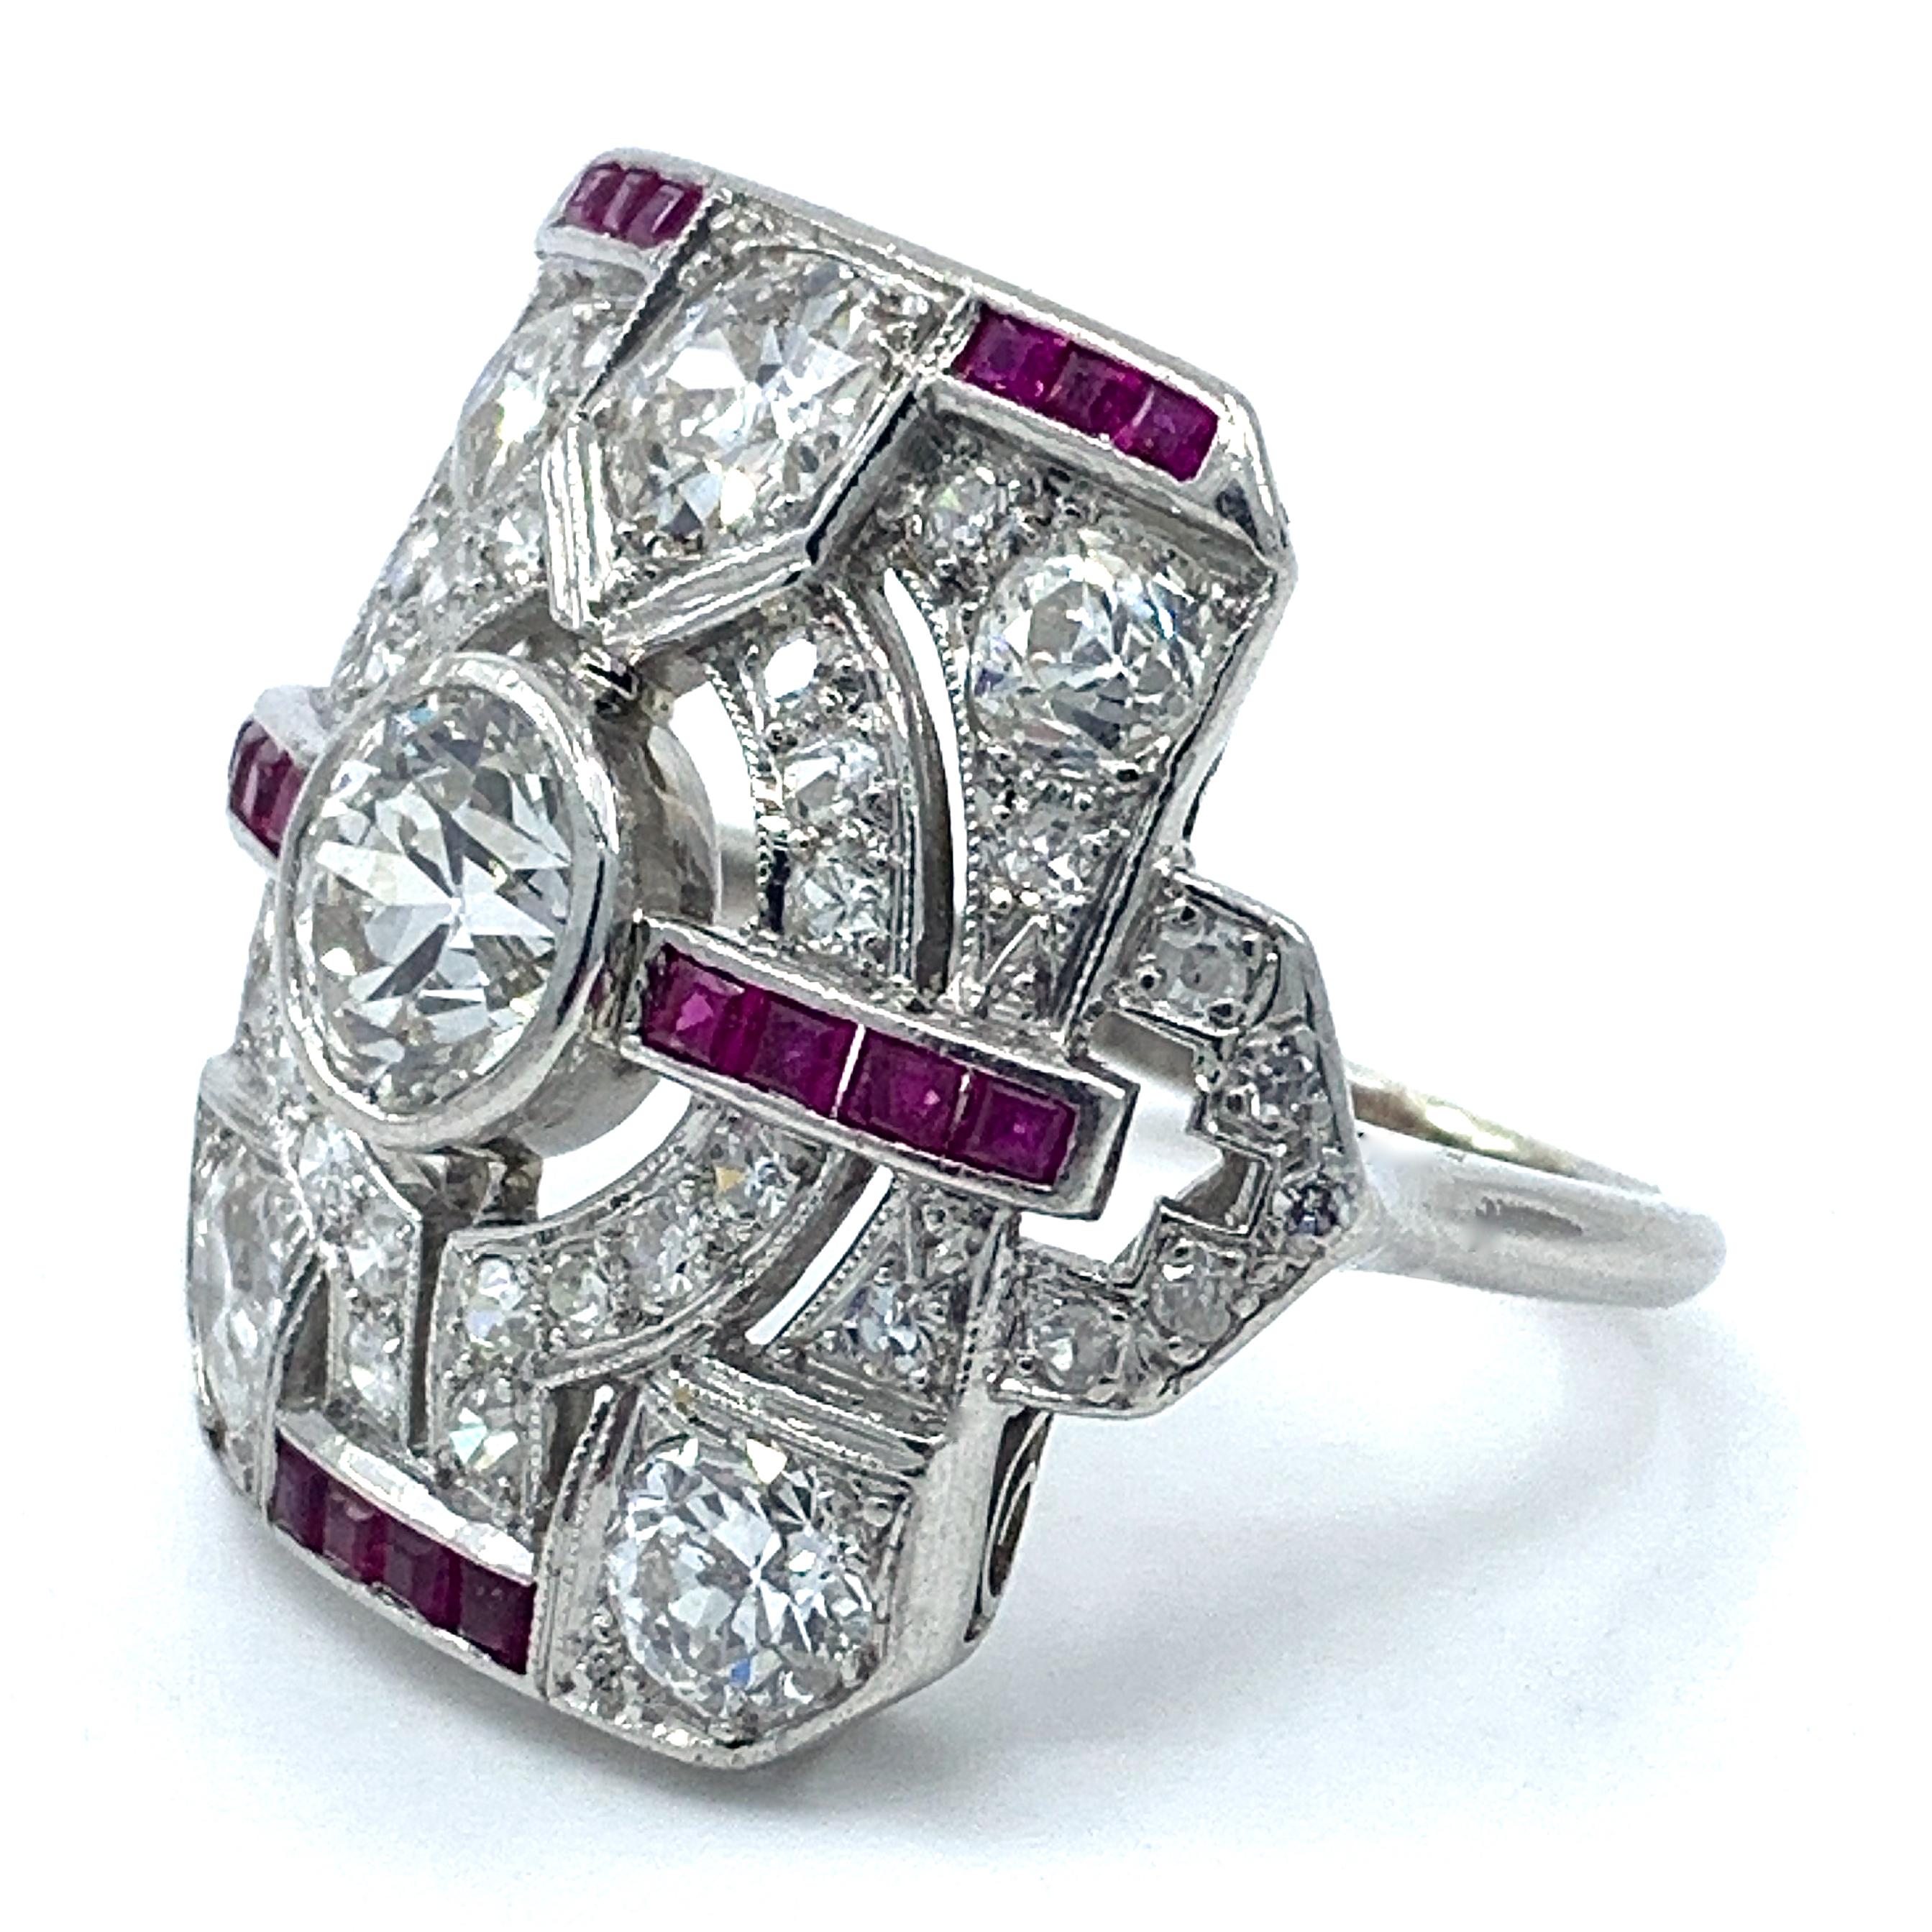 Women's Art Deco 3 Carat Diamond and Ruby Tablet or Plaque Ring in Platinum, Circa 1925 For Sale